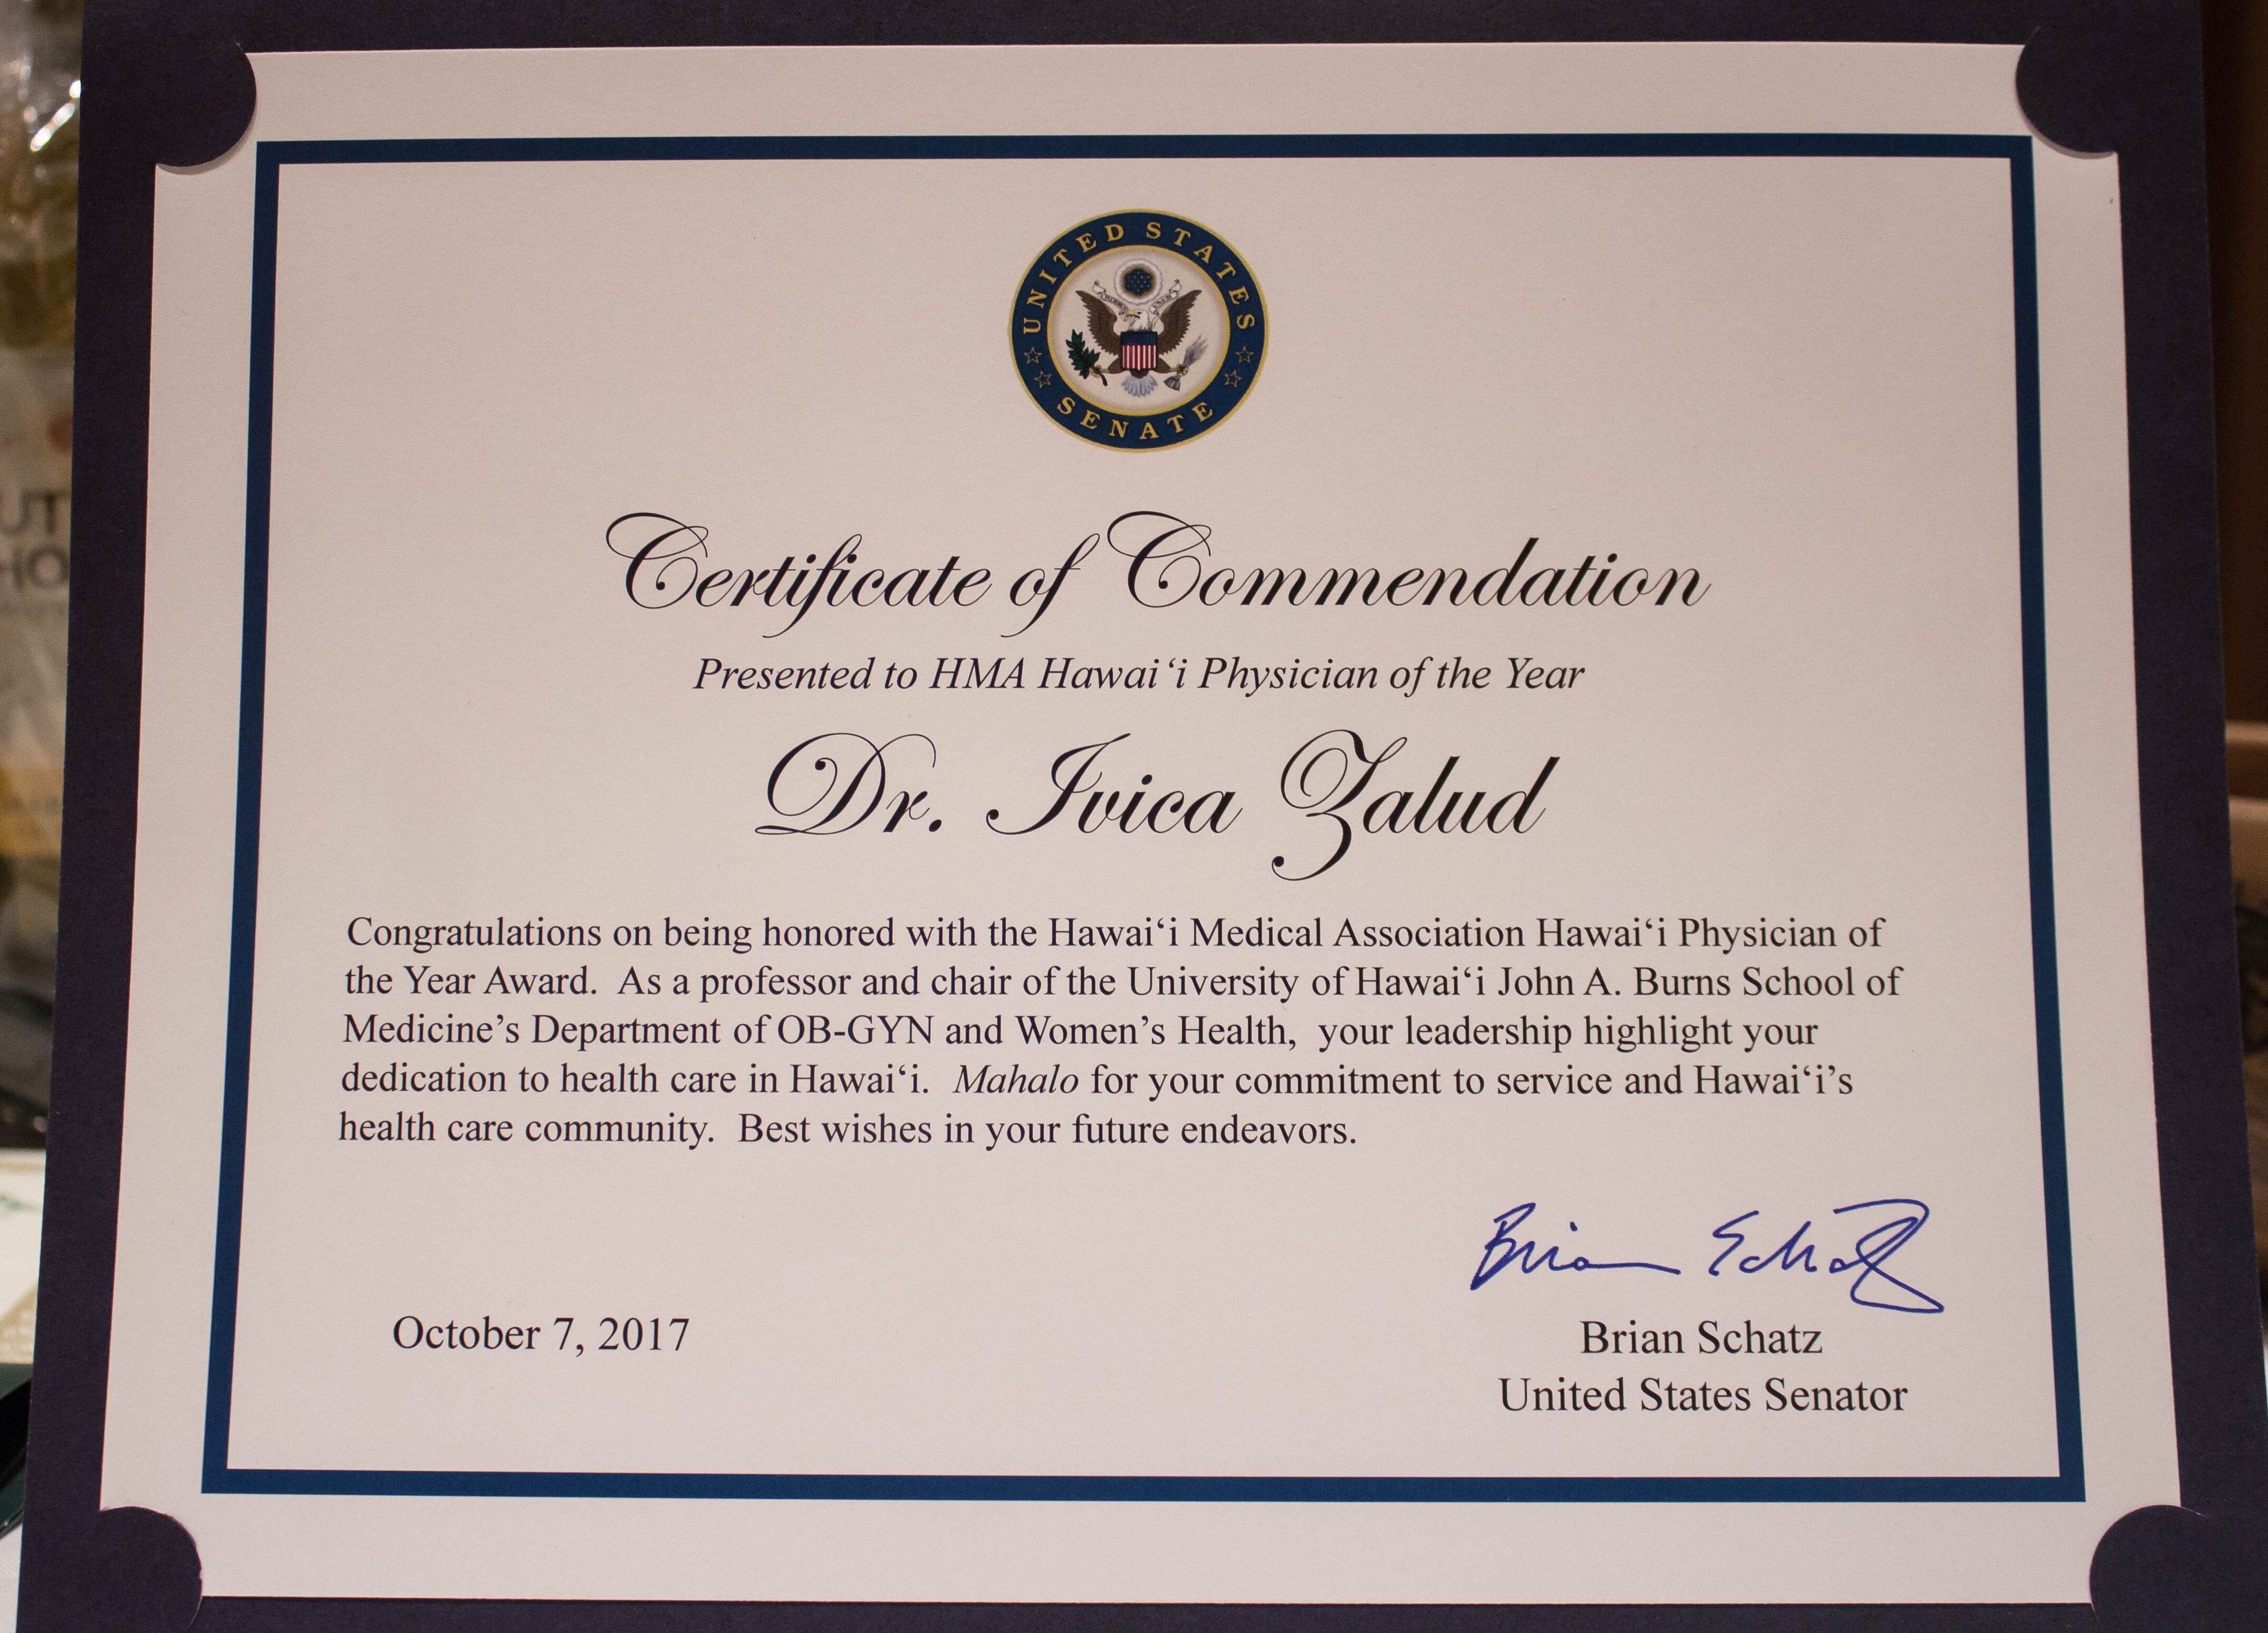 Certificate of Commendation from US Senator Brian Schatz to Dr. Ivica Zalud. Photo taken by Vina Cristobal.